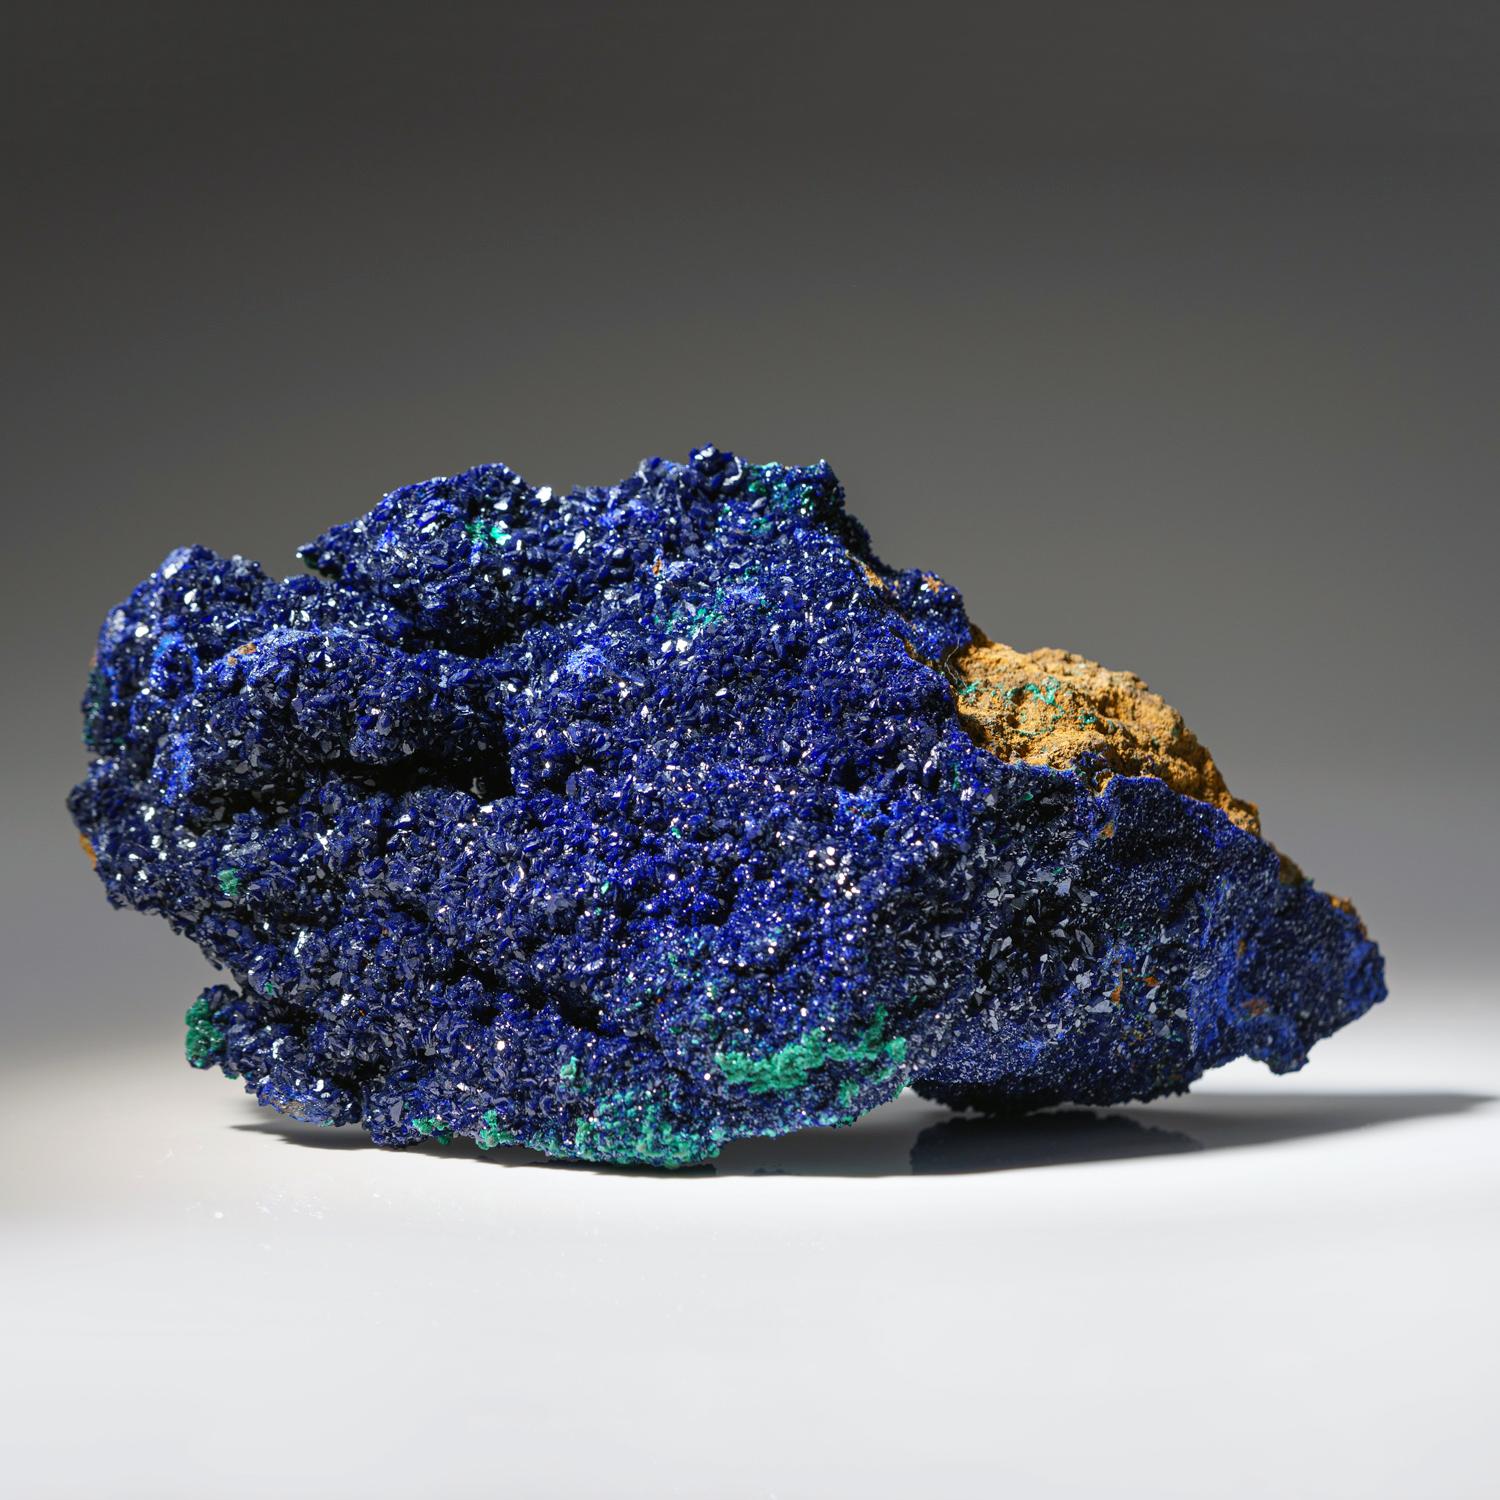 From Tsumeb Mine, Otavi-Bergland District, Oshikoto, Namibia

Rich cluster of lustrous deep royal blue azurite crystals on malachite-duftite-calcite matrix. All of the azurite crystals are highly lustrous with complex crystal